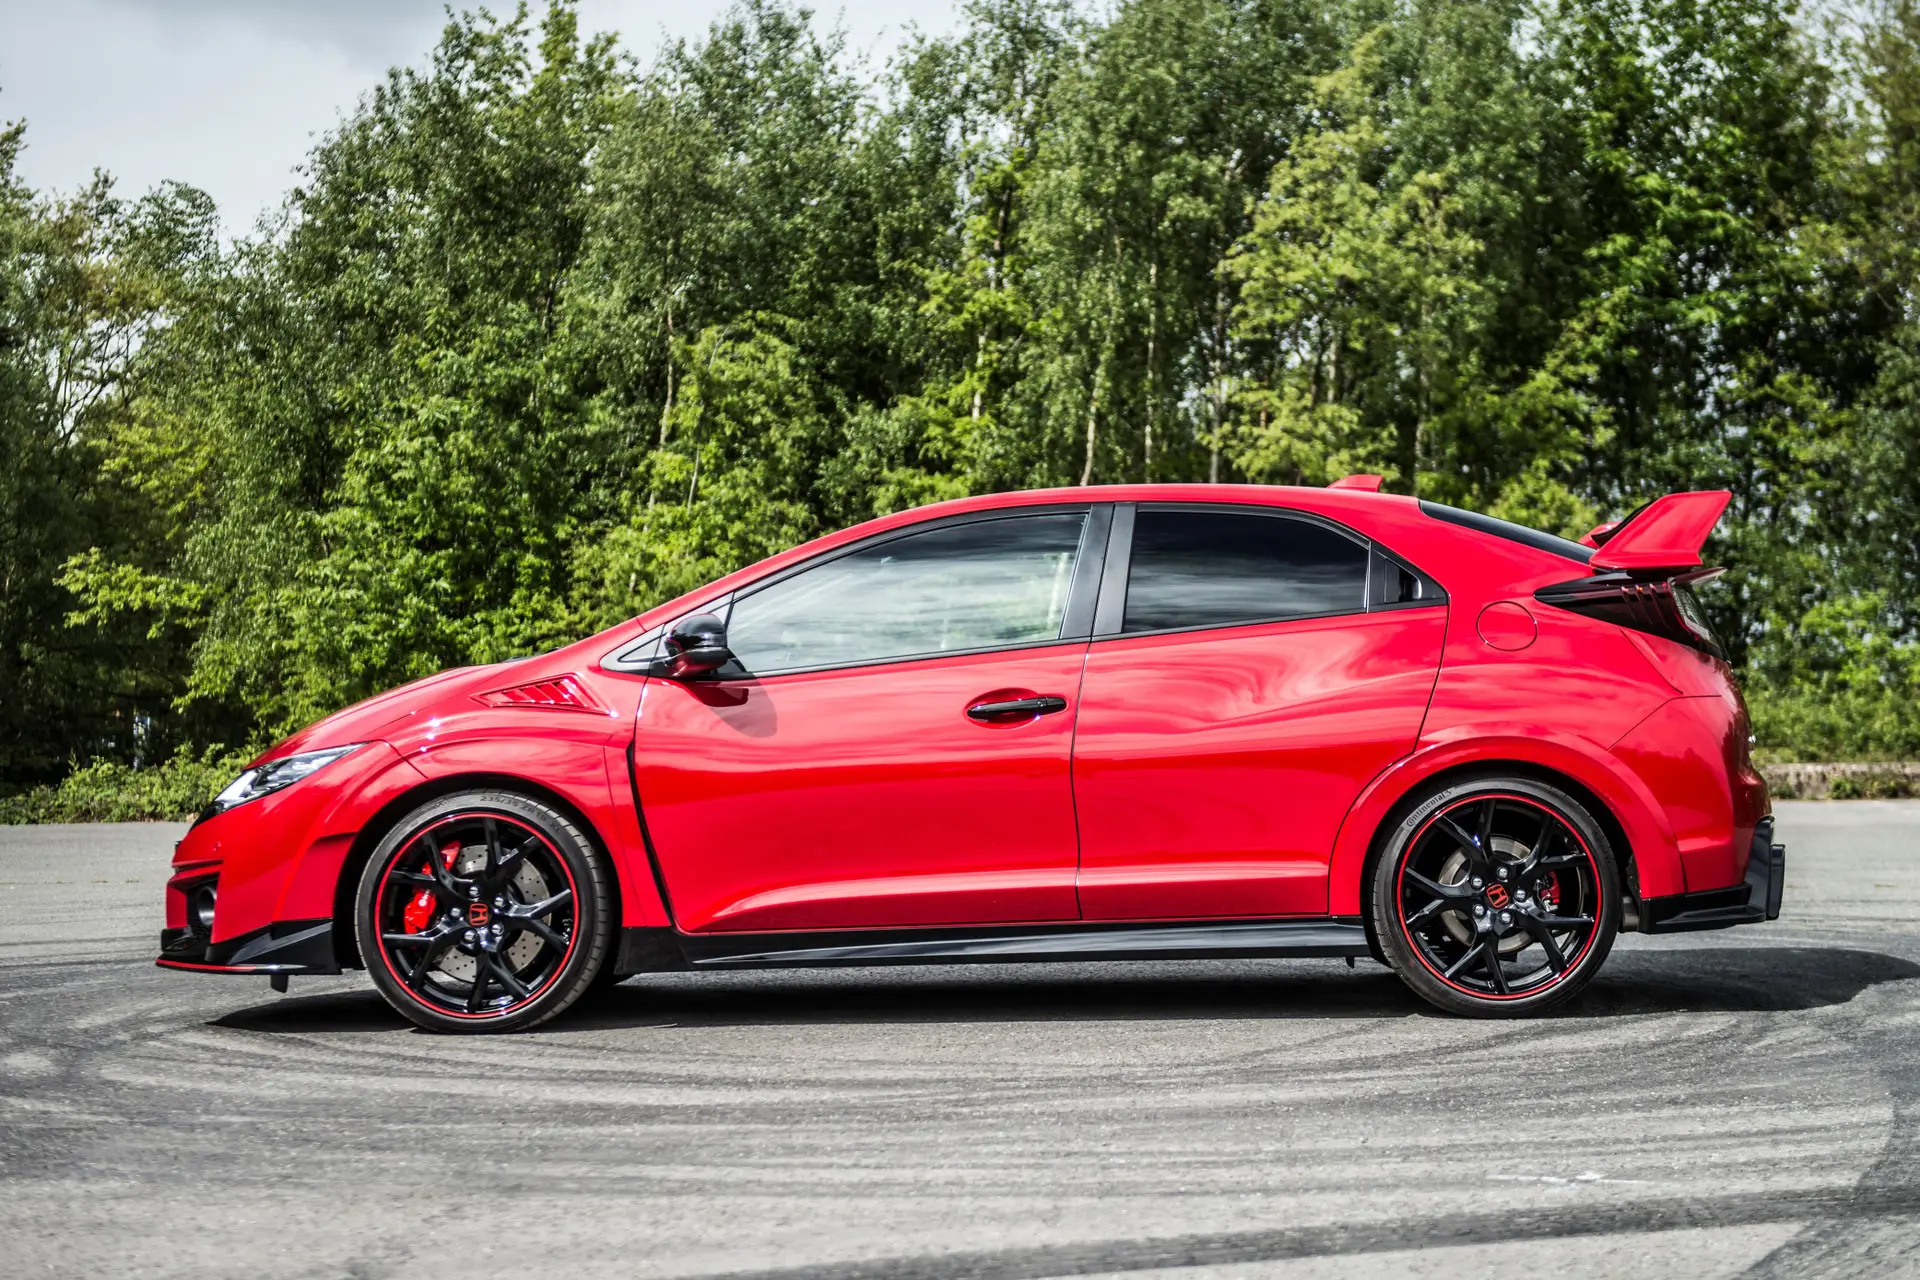 Honda Civic Type R 2023 Review: exterior side photo of the Honda Civic Type R